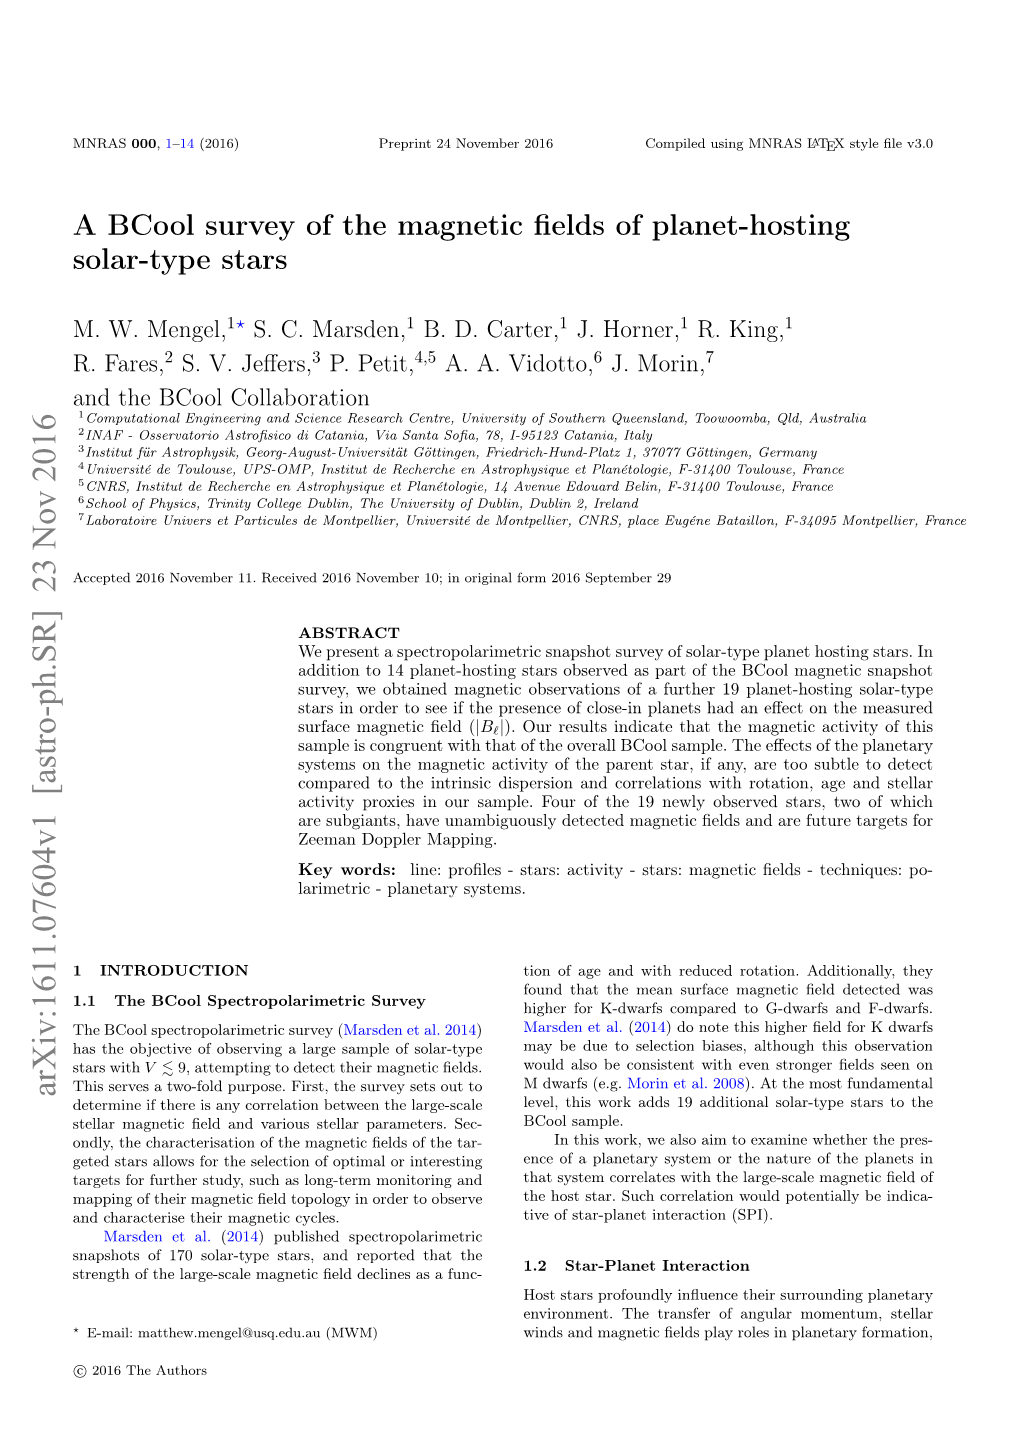 A Bcool Survey of the Magnetic Fields of Planet-Hosting Solar-Type Stars